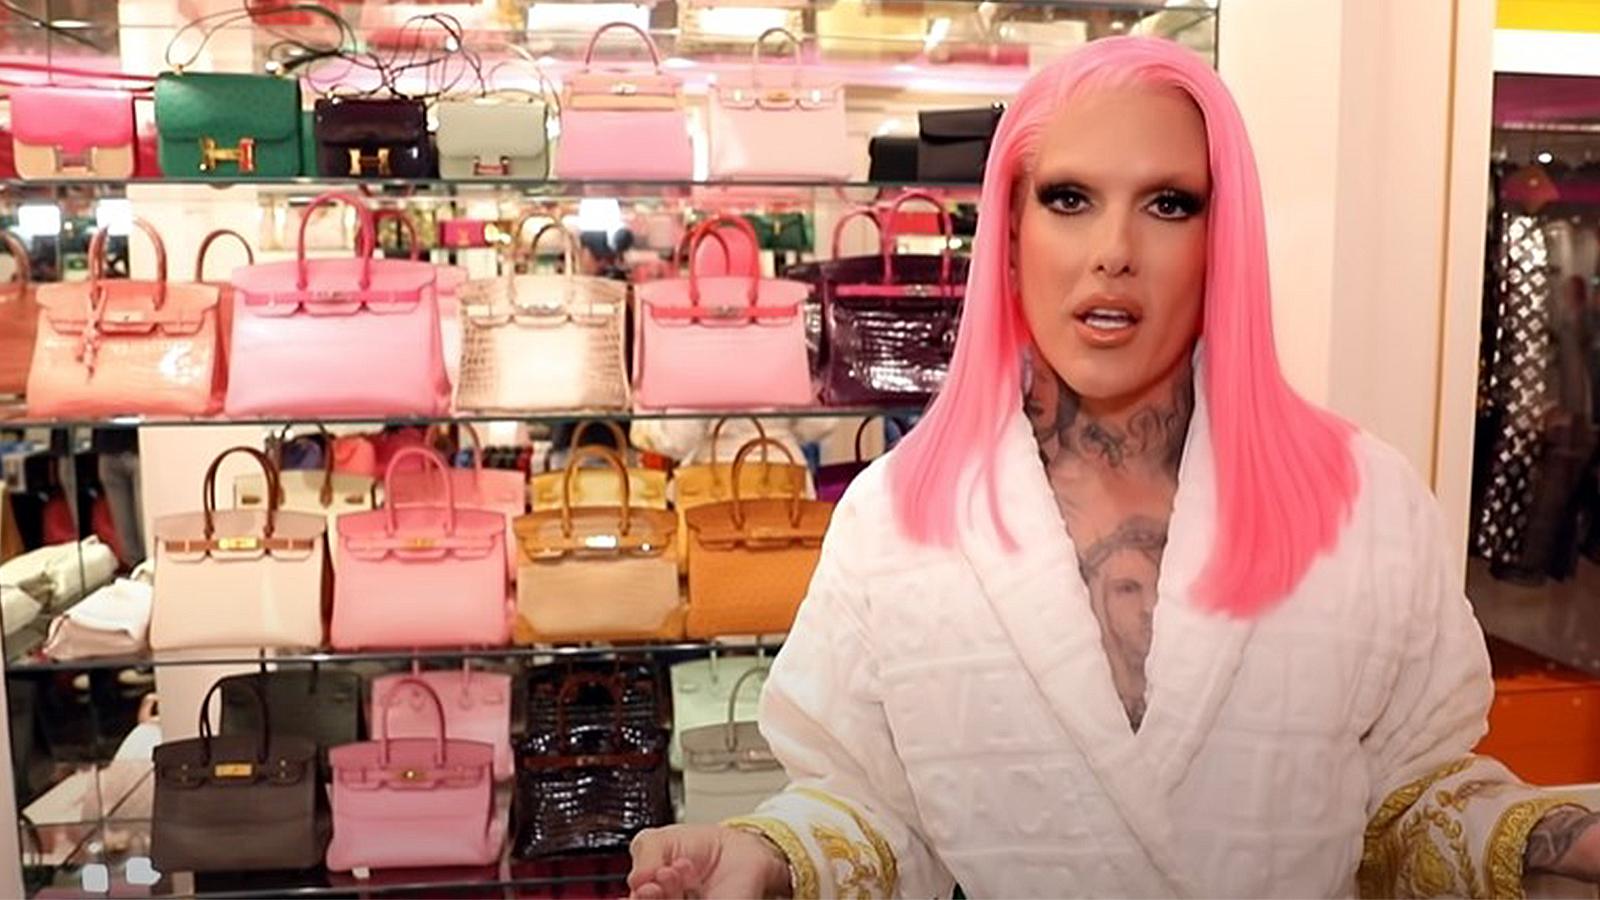 Jeffree Star made millions from selling Birkin bag collection